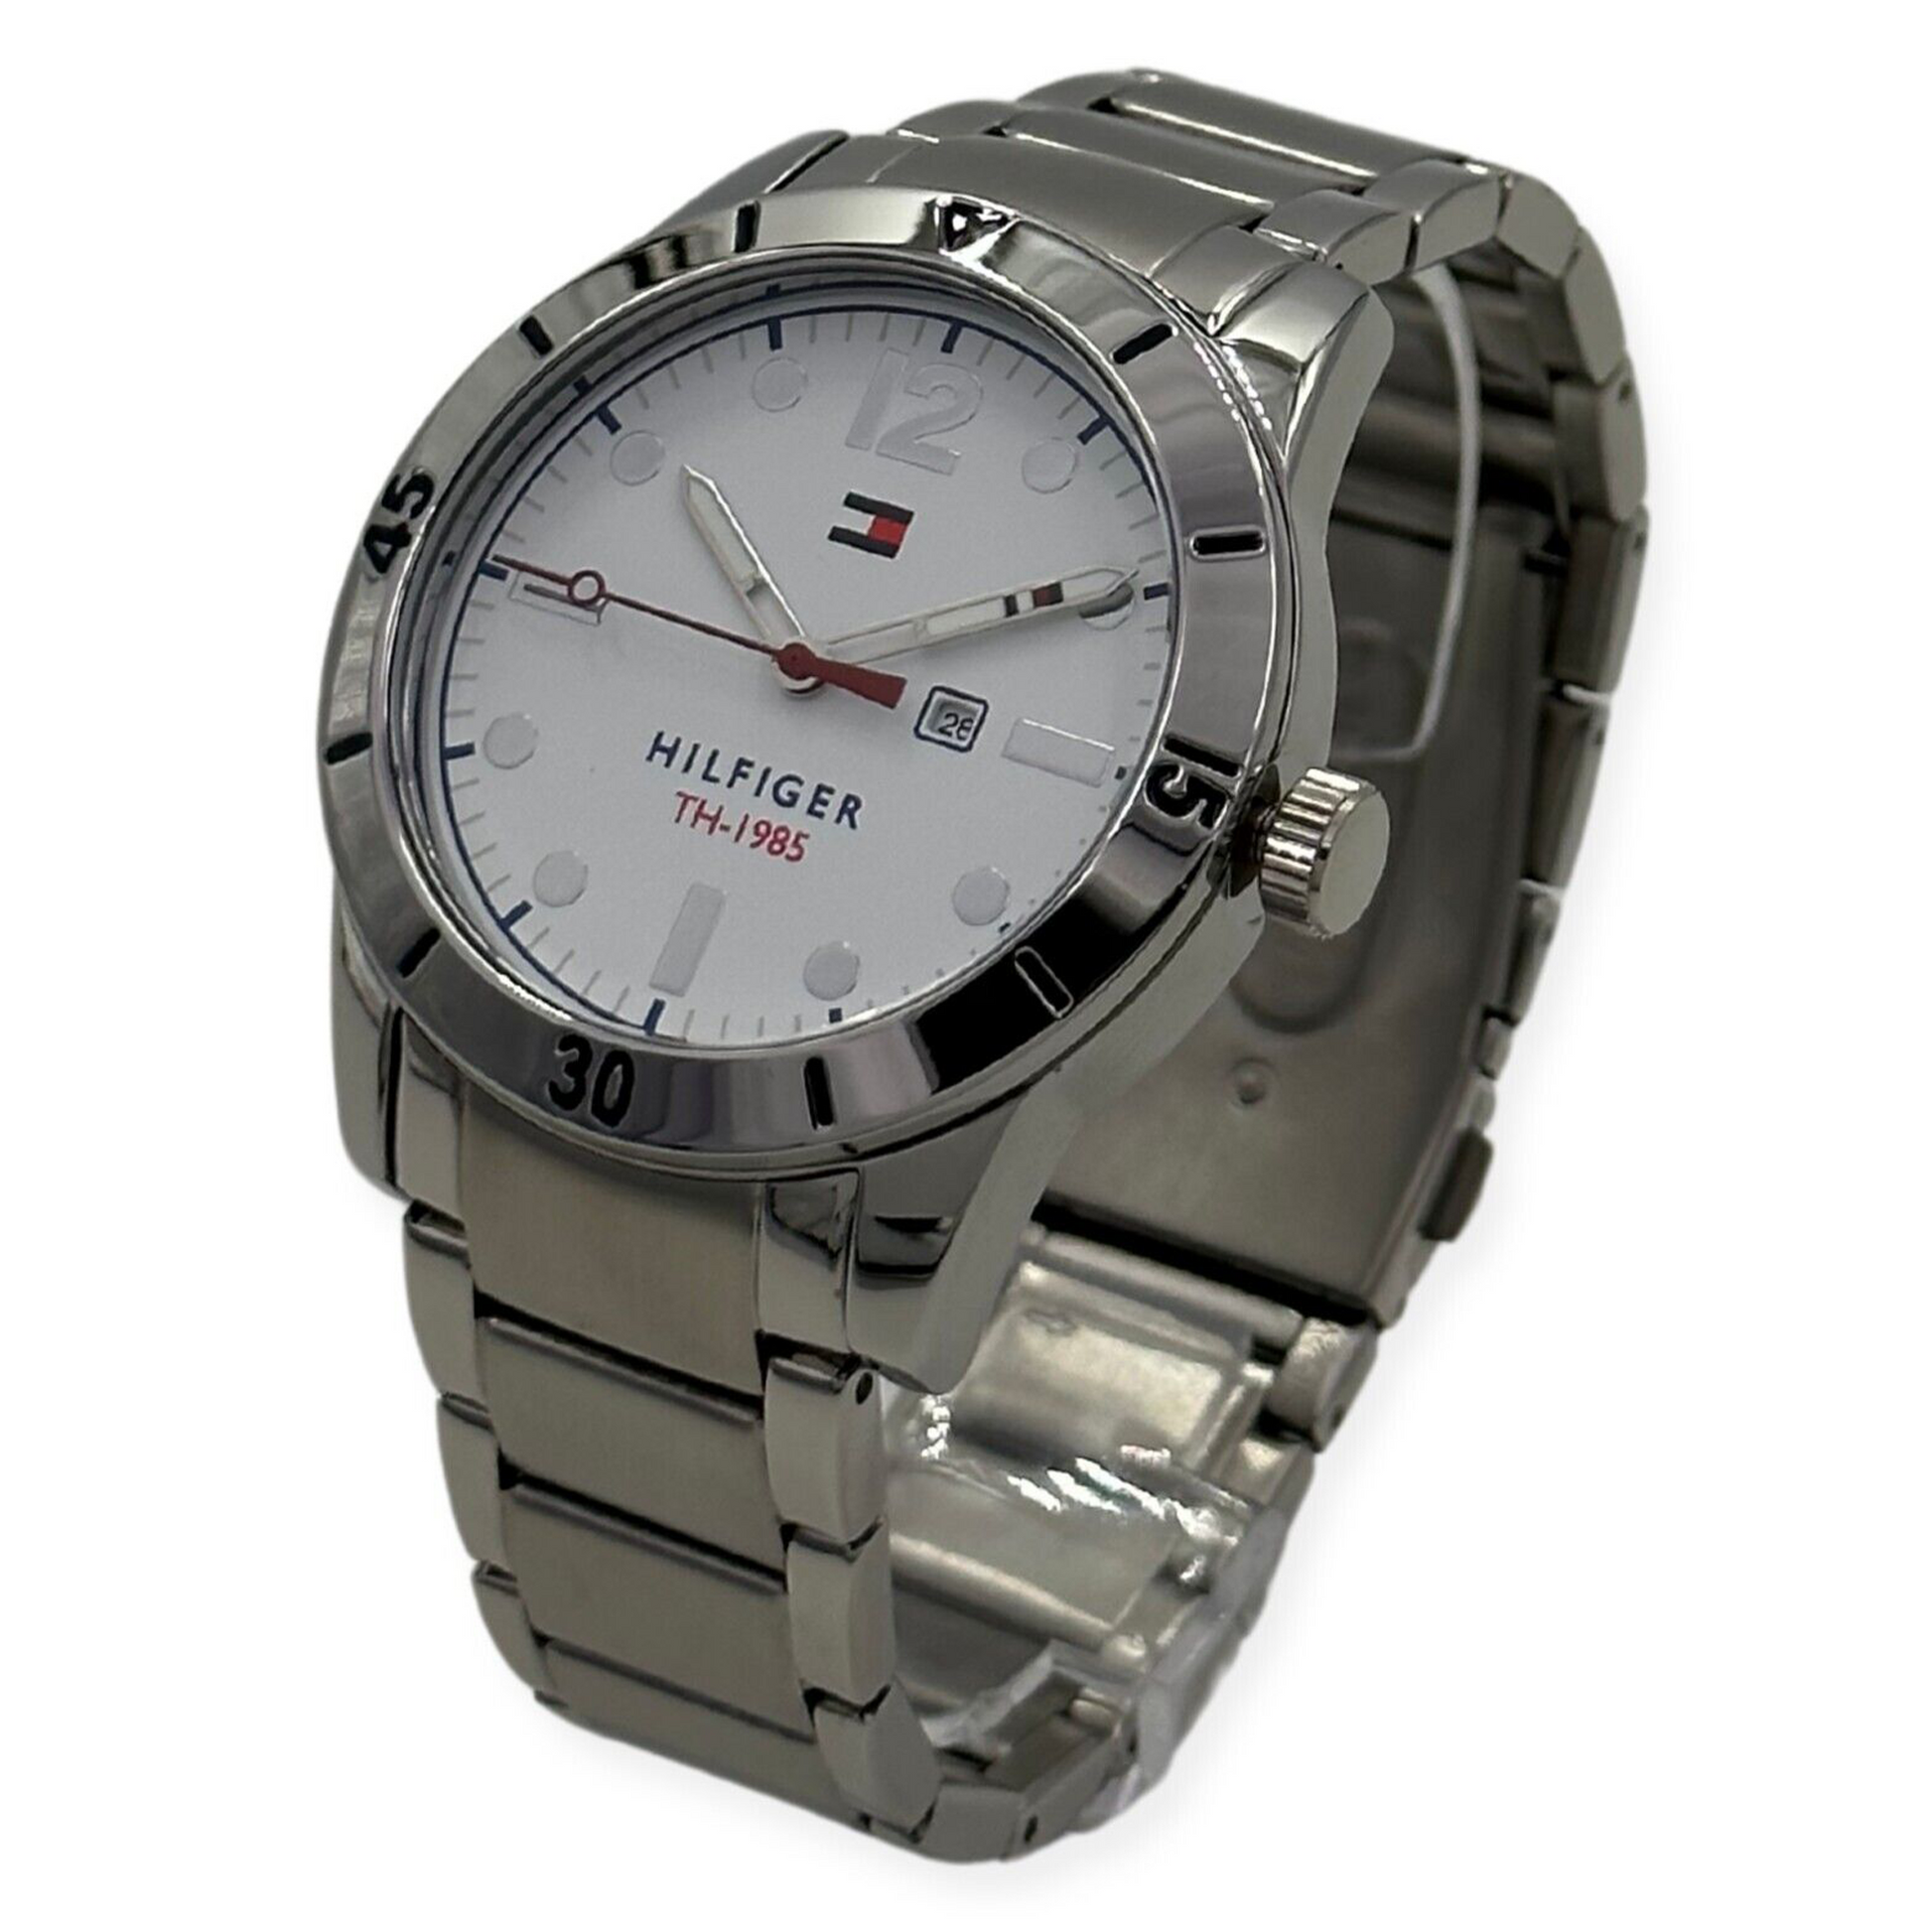 Tommy Hilfiger Men's White Dial Metal Band Watch - 1791441 - 885997242004 